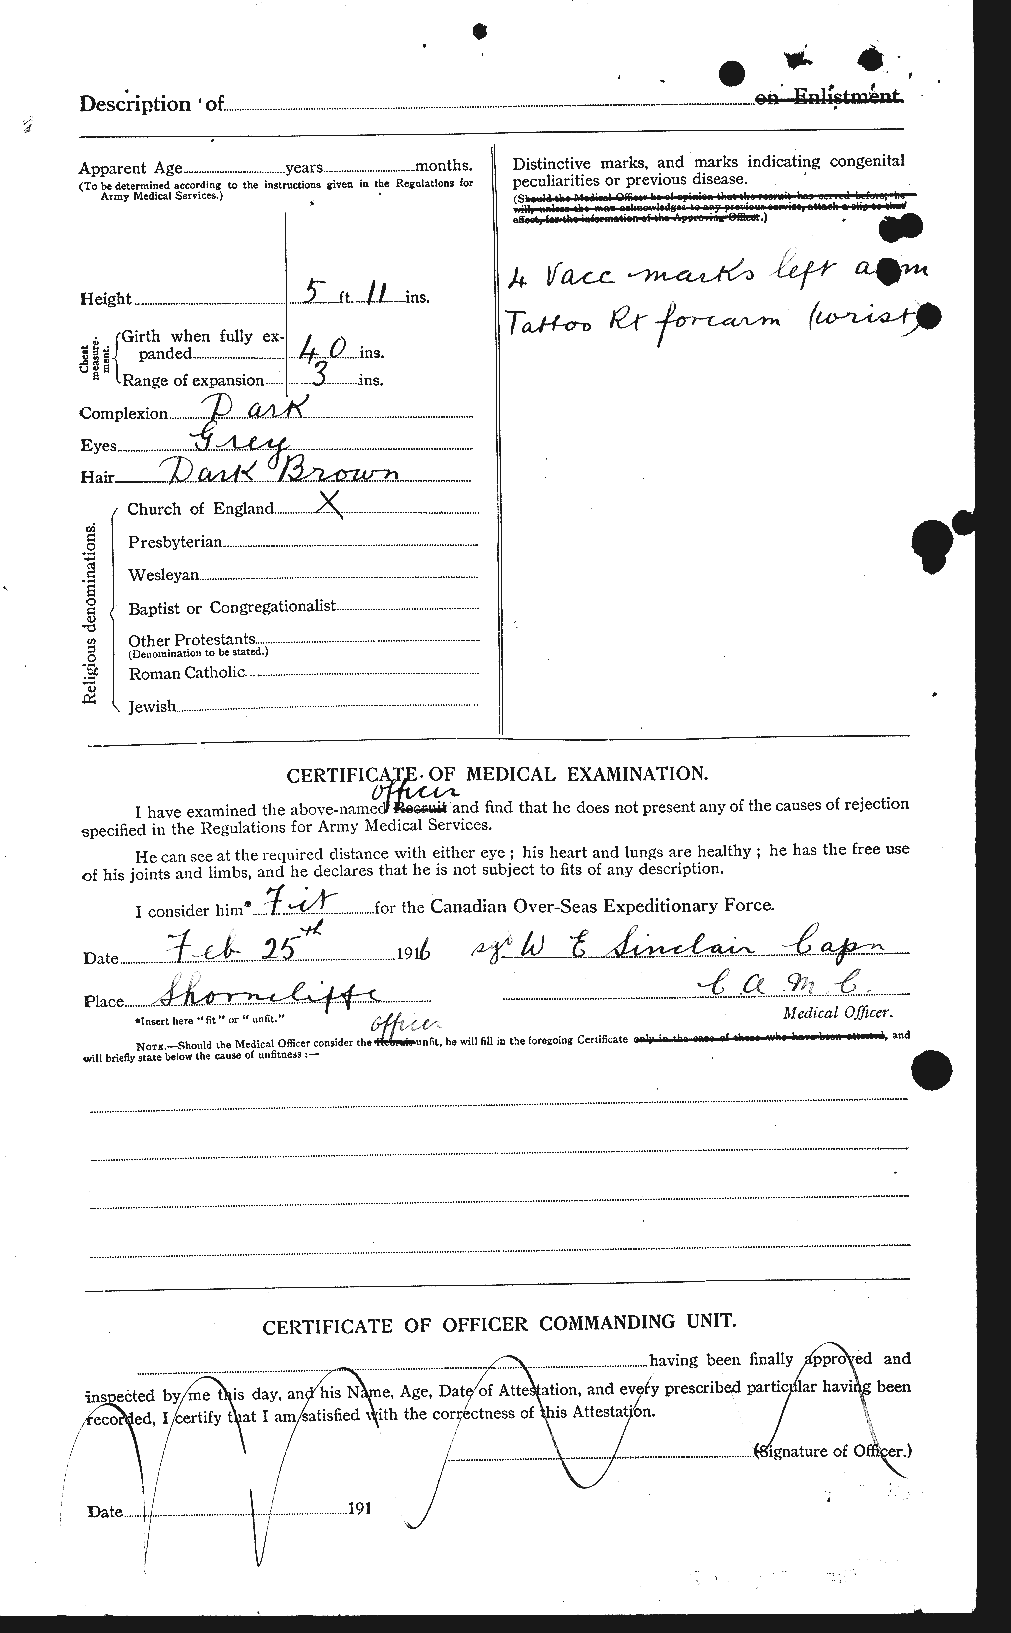 Personnel Records of the First World War - CEF 093003b